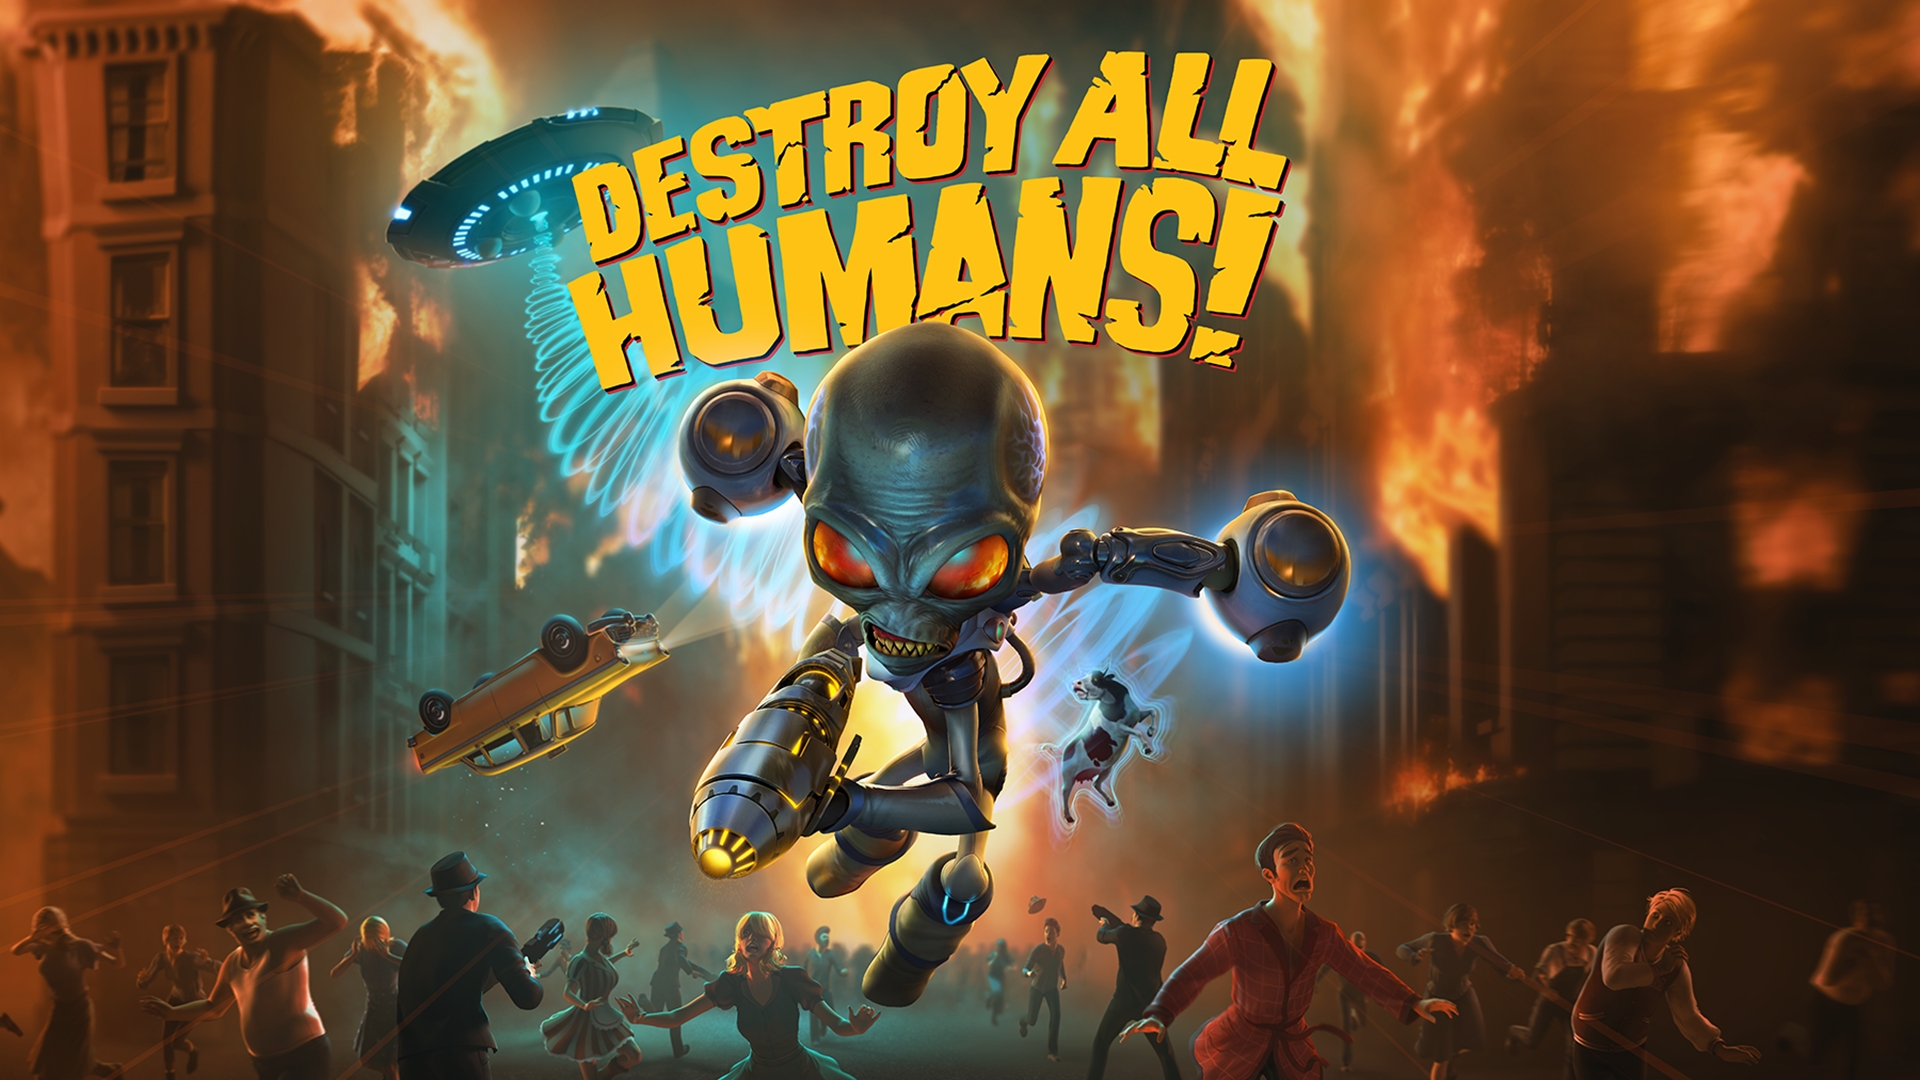 destroy all humans on switch